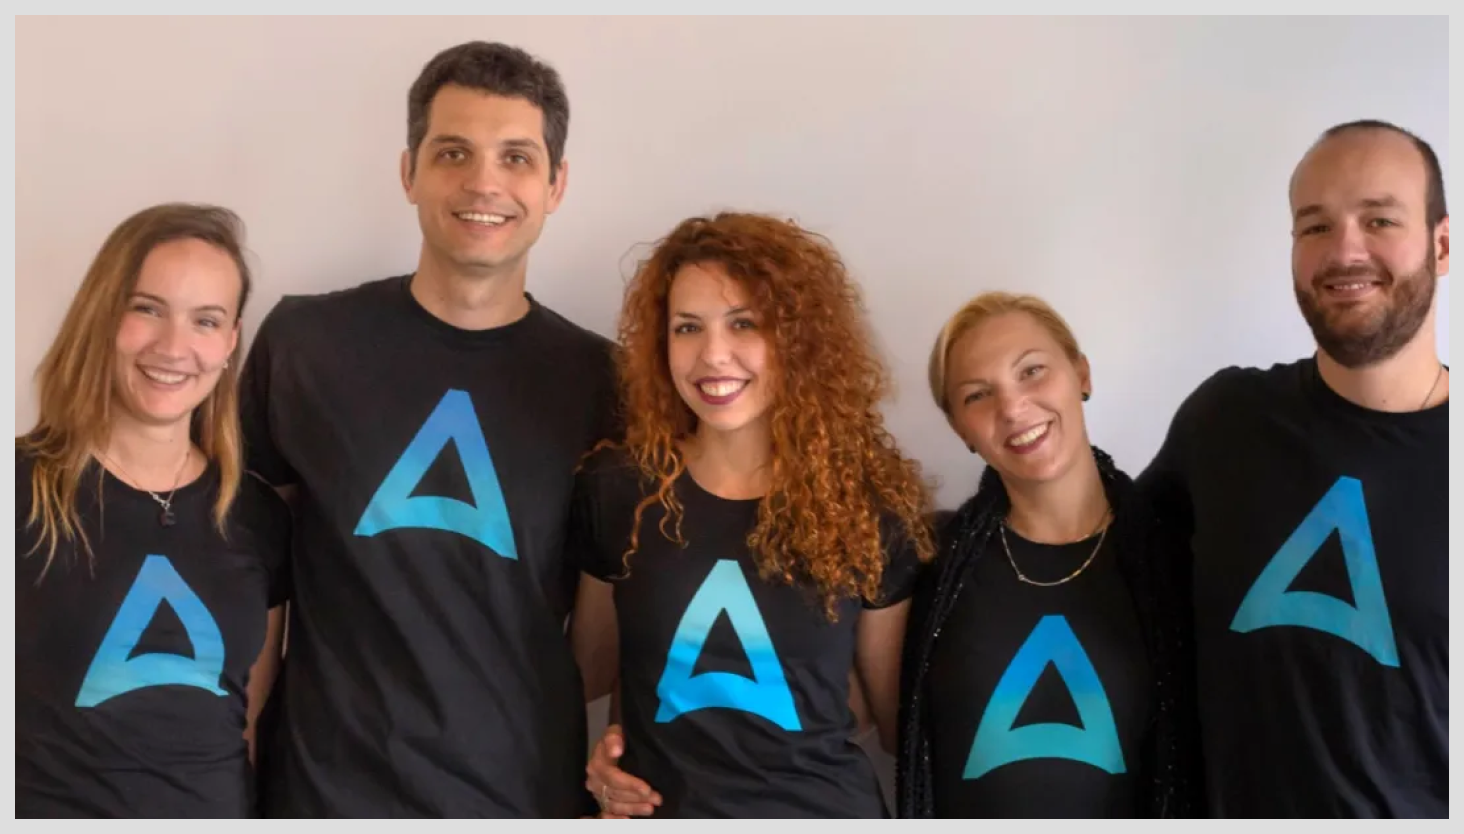 Five Alchemy Cloud employees wearing a shirt with the Alchemy Cloud logo